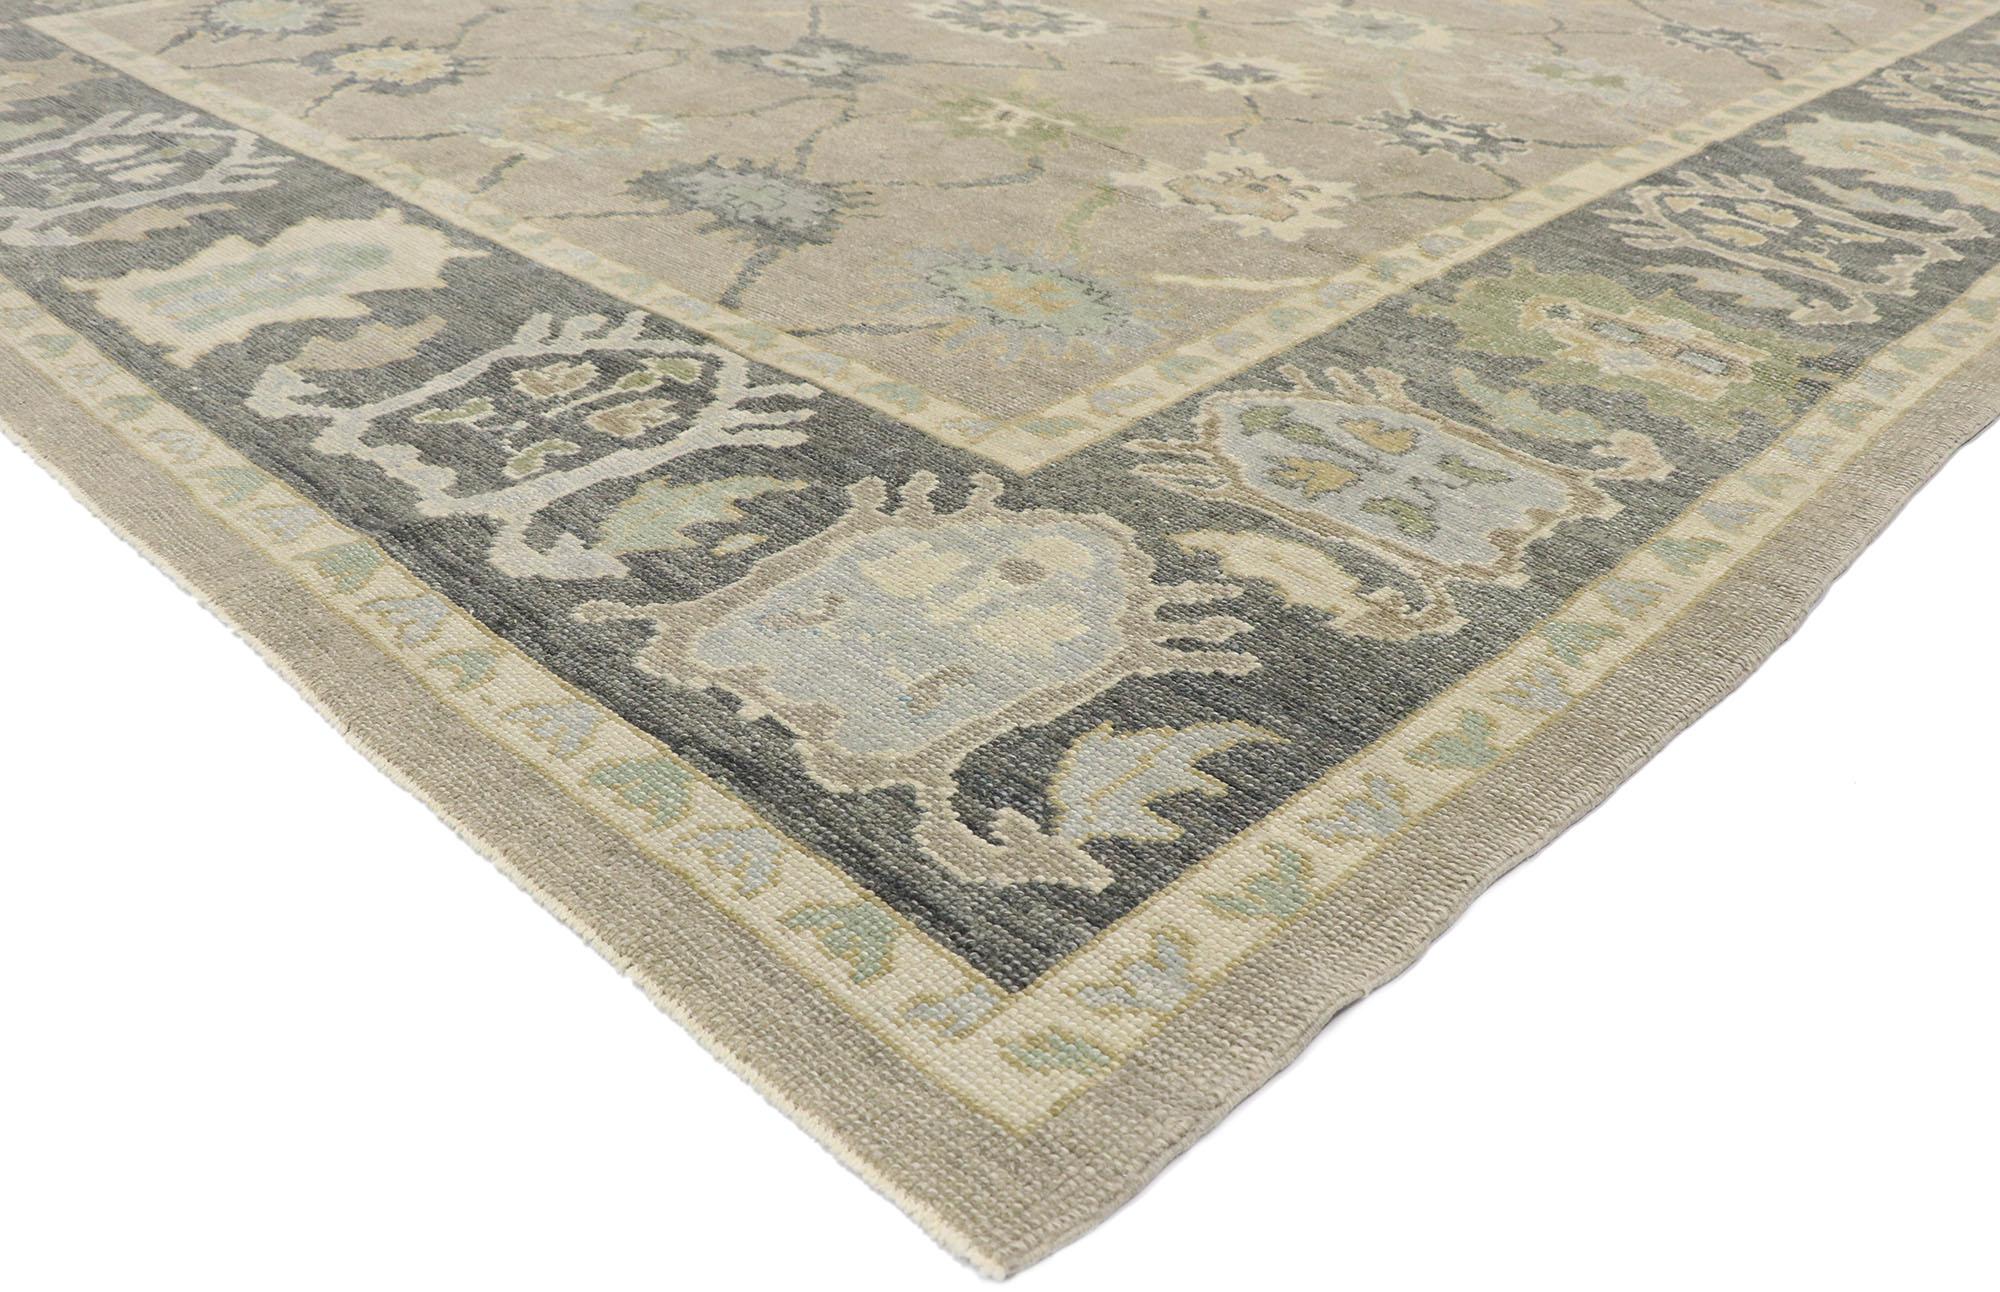 53517, new contemporary Turkish Oushak rug with modern transitional style 10'07 x 14'01. This hand-knotted wool contemporary Turkish Oushak rug balances a timeless design with a mix of sophistication and neutral colors. The abrashed gray field